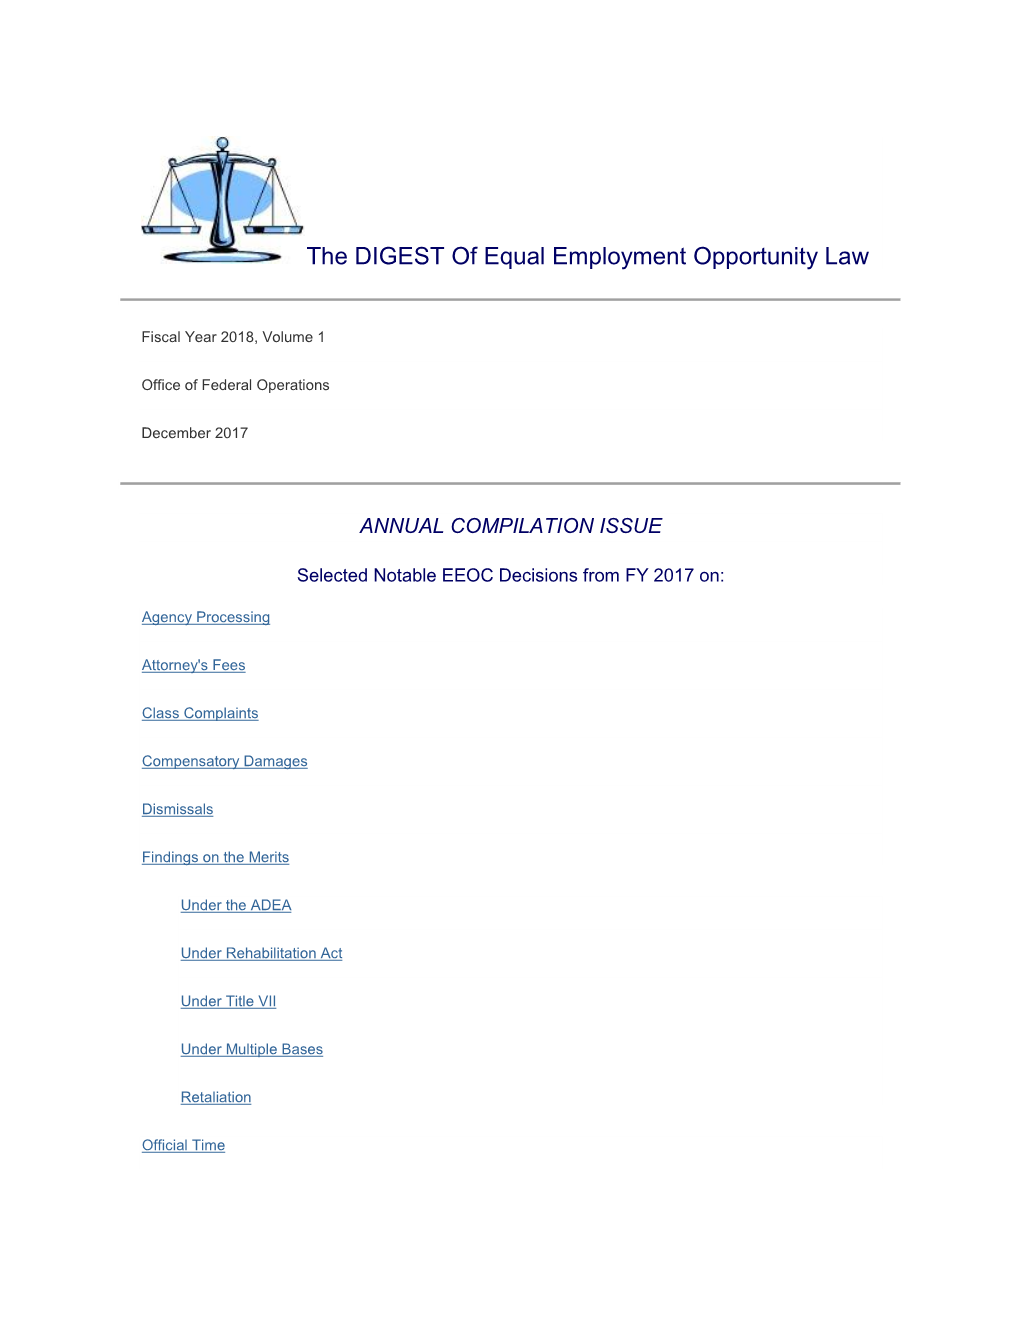 The DIGEST of Equal Employment Opportunity Law